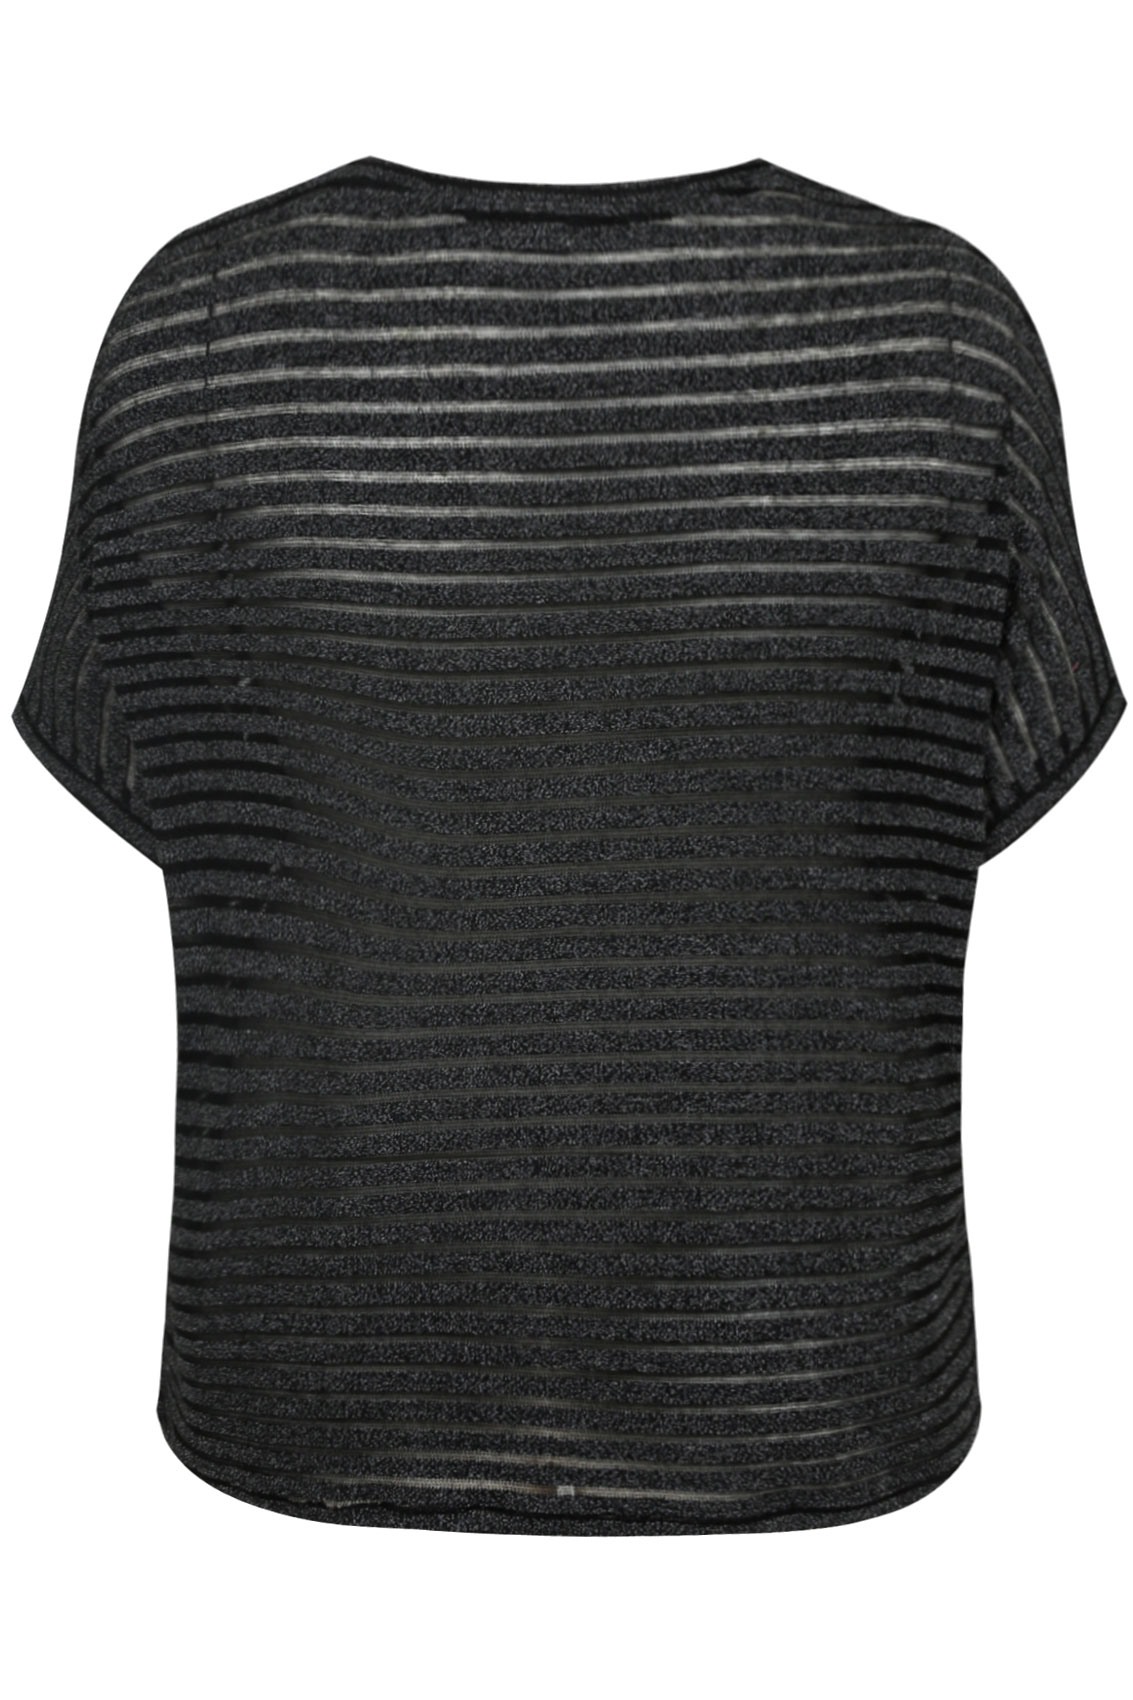 Grey and Black Stripe 3/4 Length Batwing Sleeve Top Plus Size 16,18,20 ...